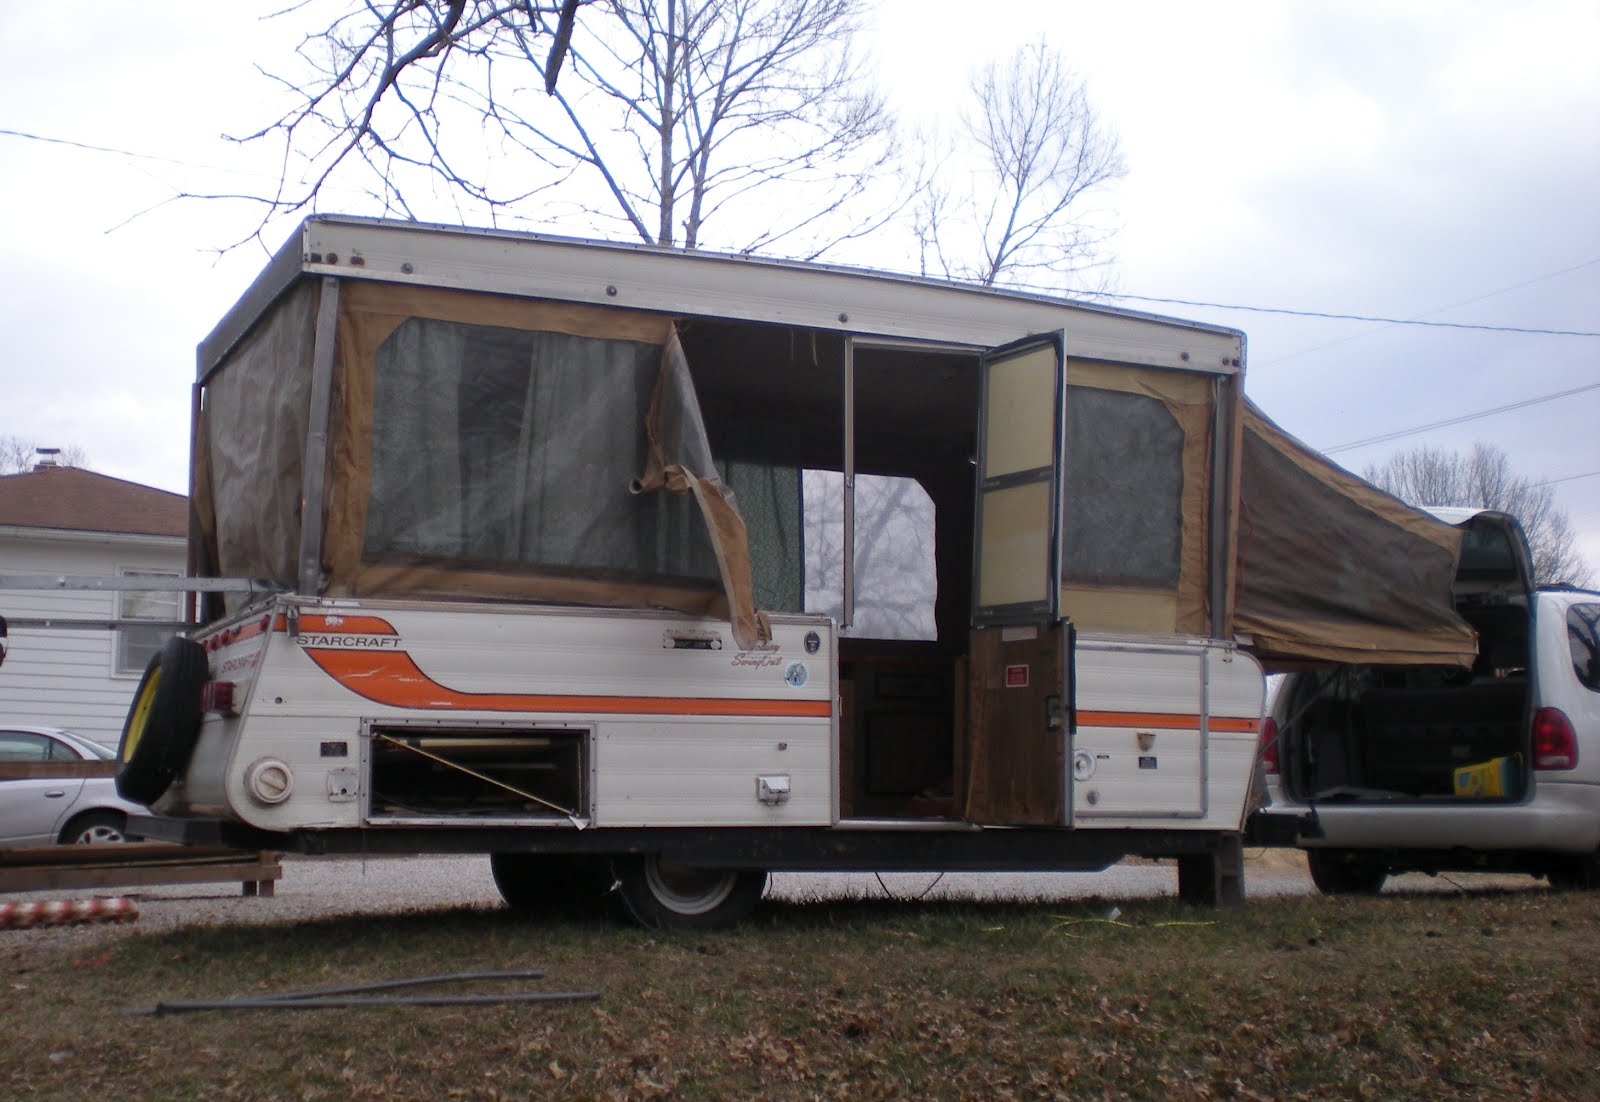 Rational Living The Camper Project